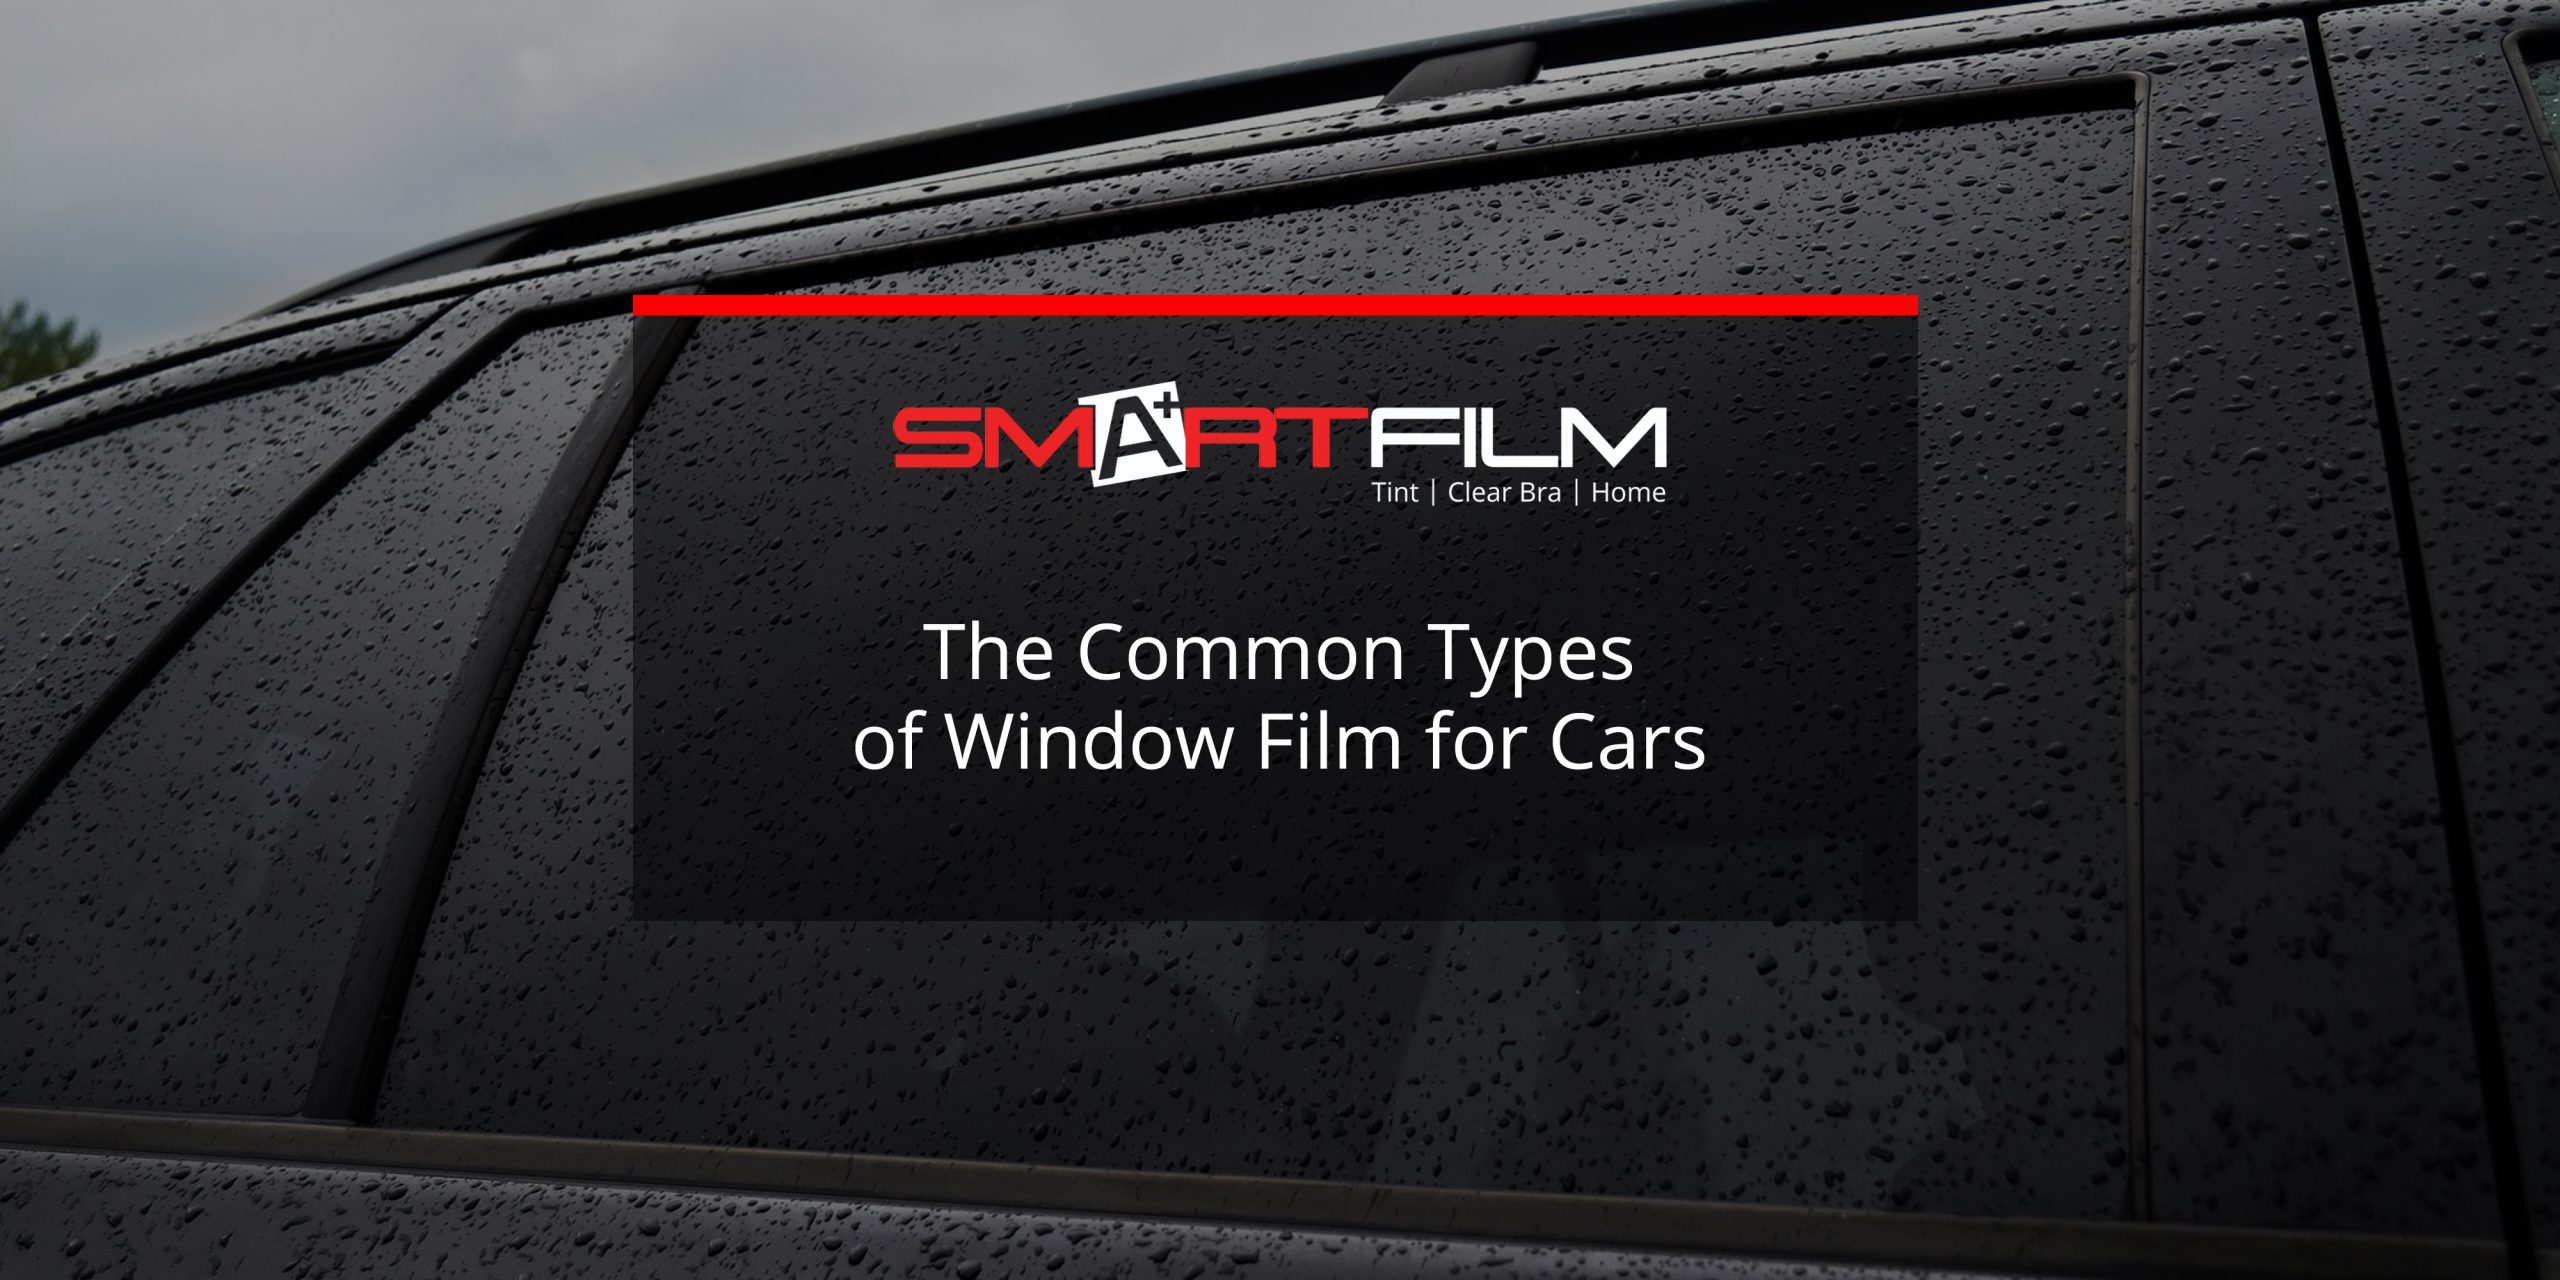 The Top Brands of Car Window Film to Consider